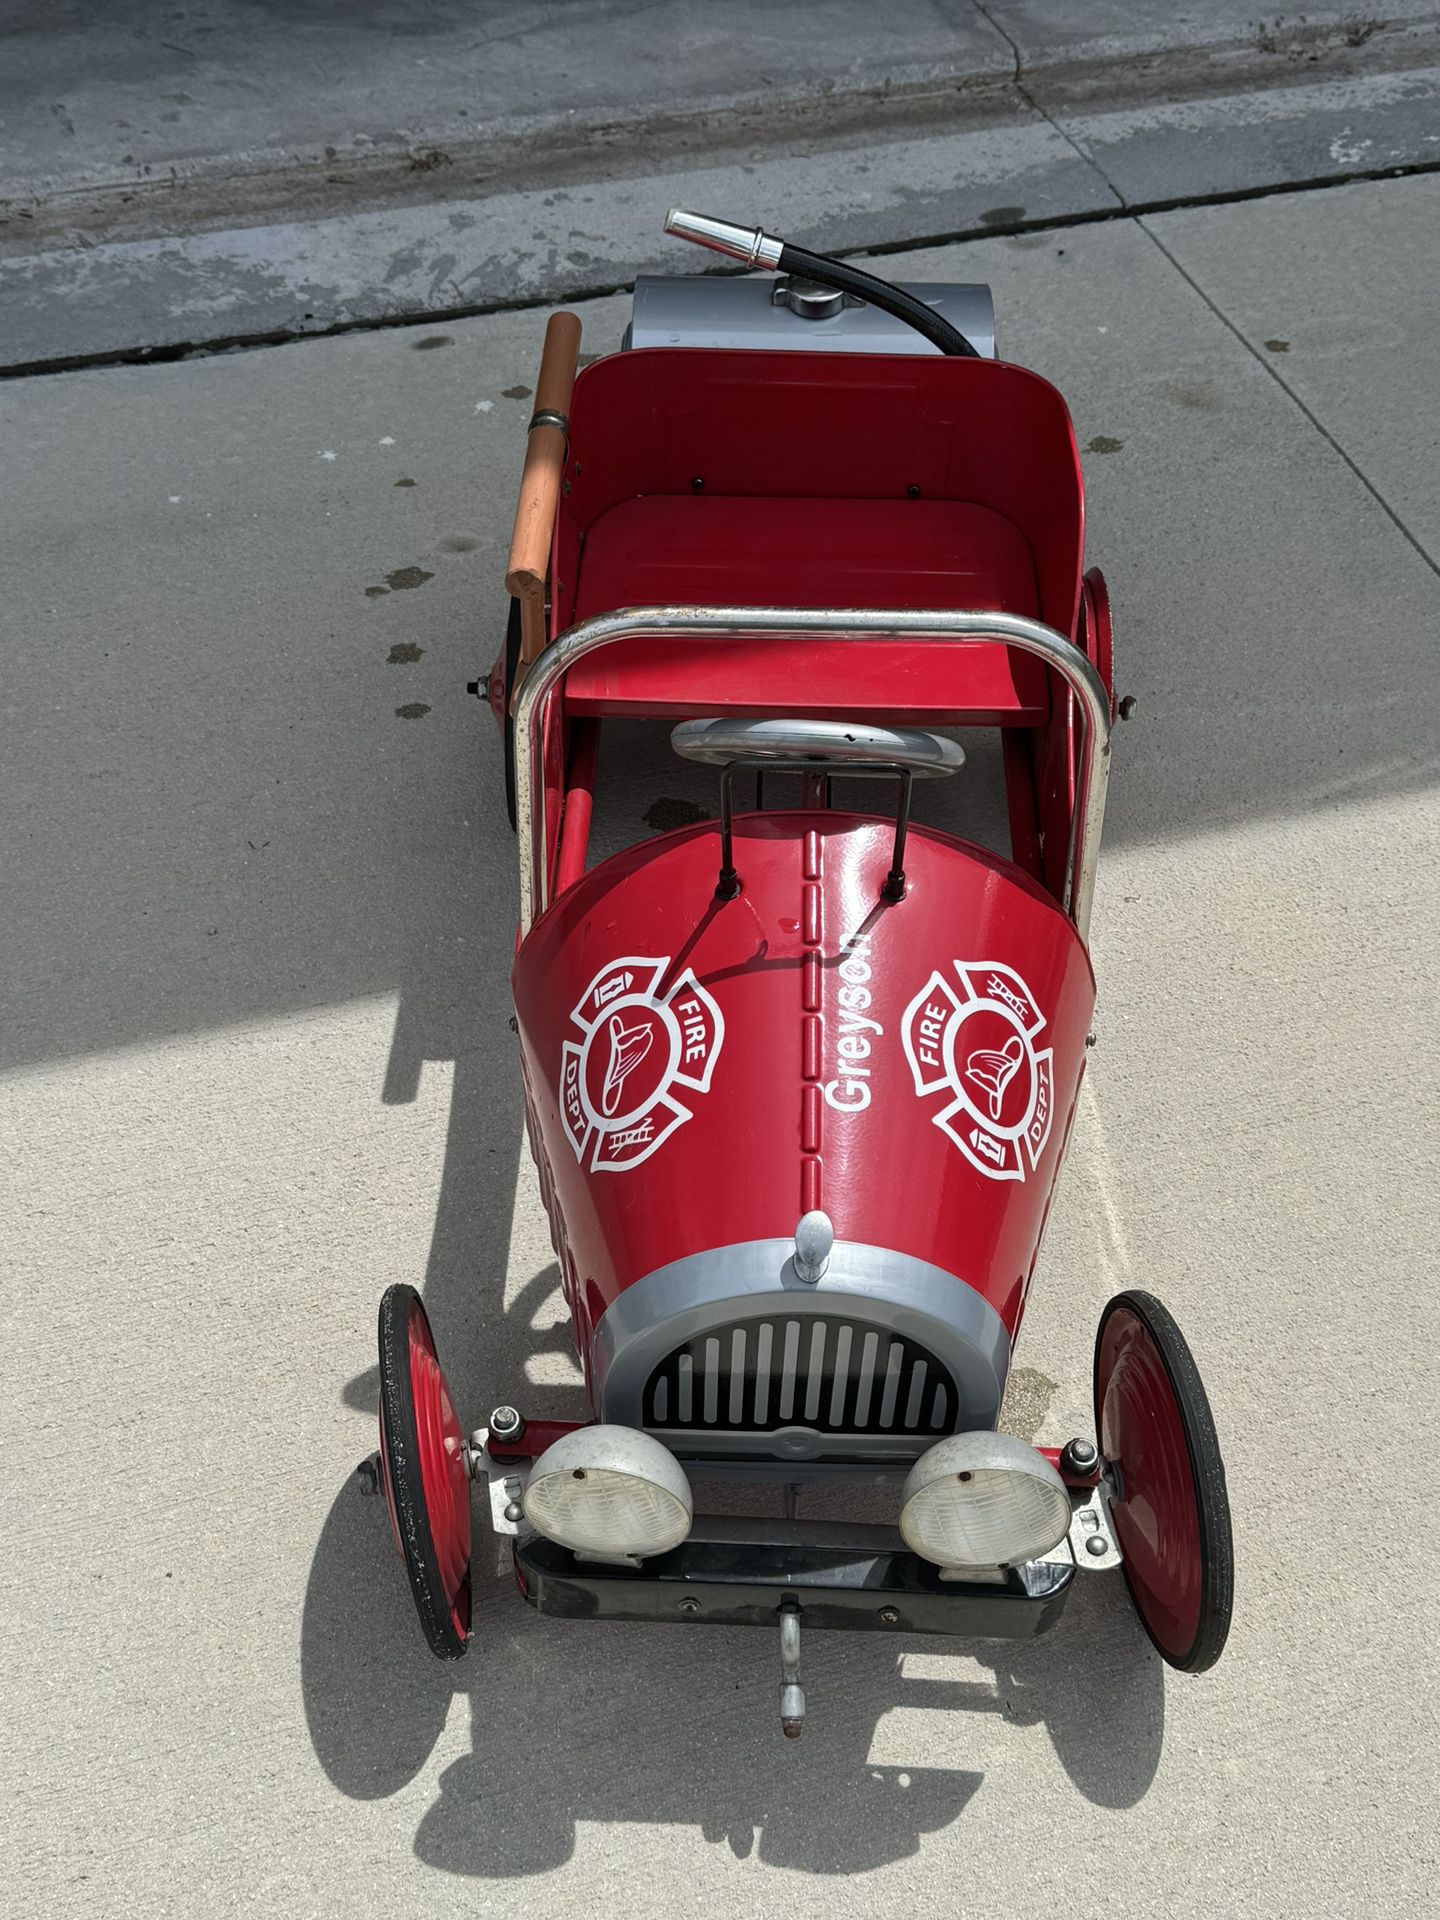 Morgan Cycle RETRO STYLE FIRE ENGINE PUMPER Kids Pedal Ride-On Car, 21121. Good condition, missing rubber on 1 wheel!